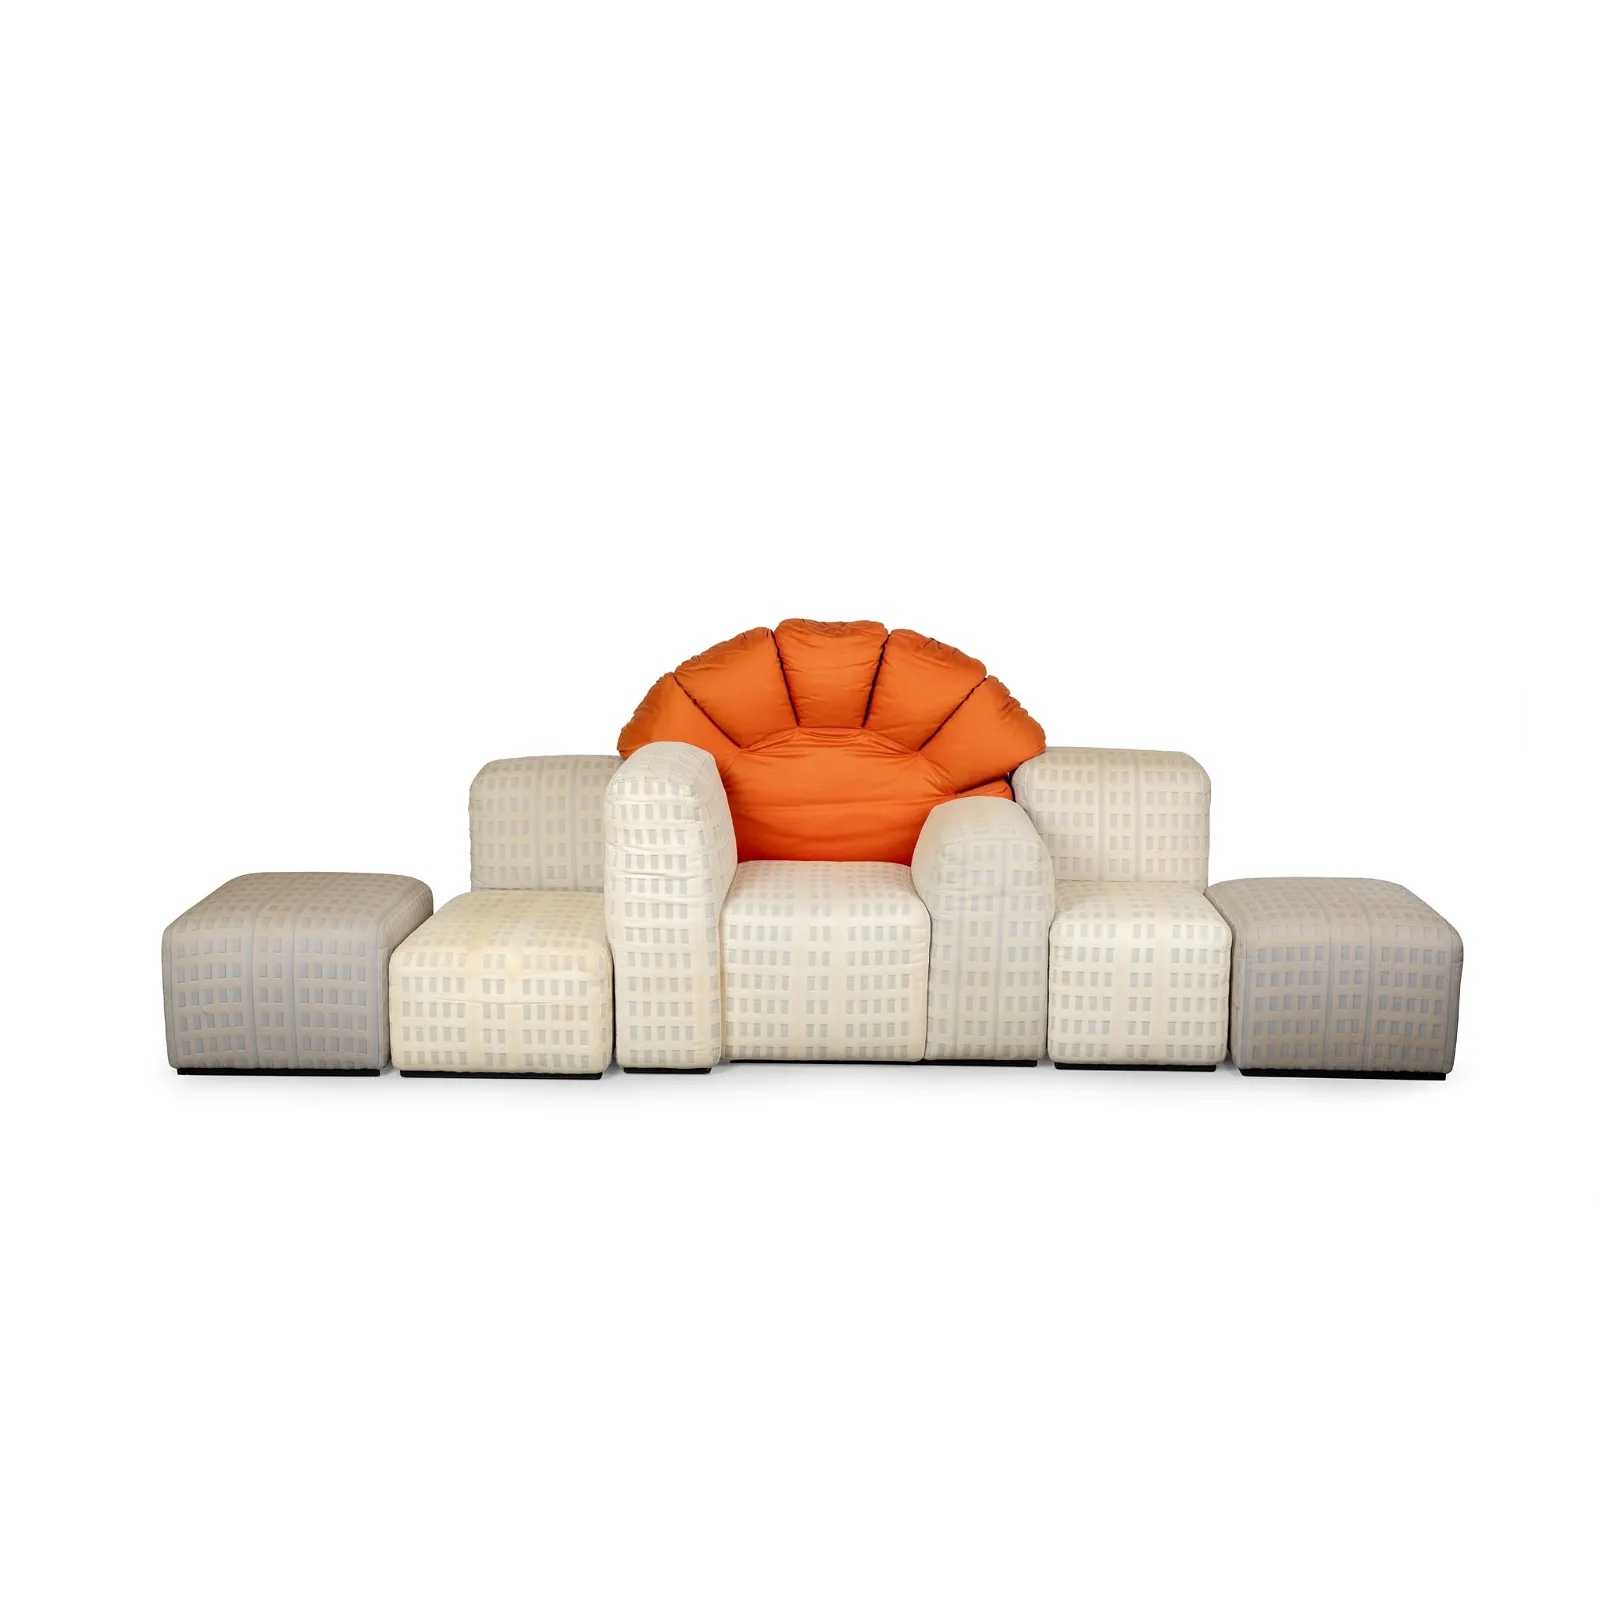 Tramonto a New York (Sunset over New York) three-seater sofa designed by Gaetano Pesce for Cassina, which sold for £6,000 ($7,530, or $9,865 with buyer’s premium) at Lyon & Turnbull.